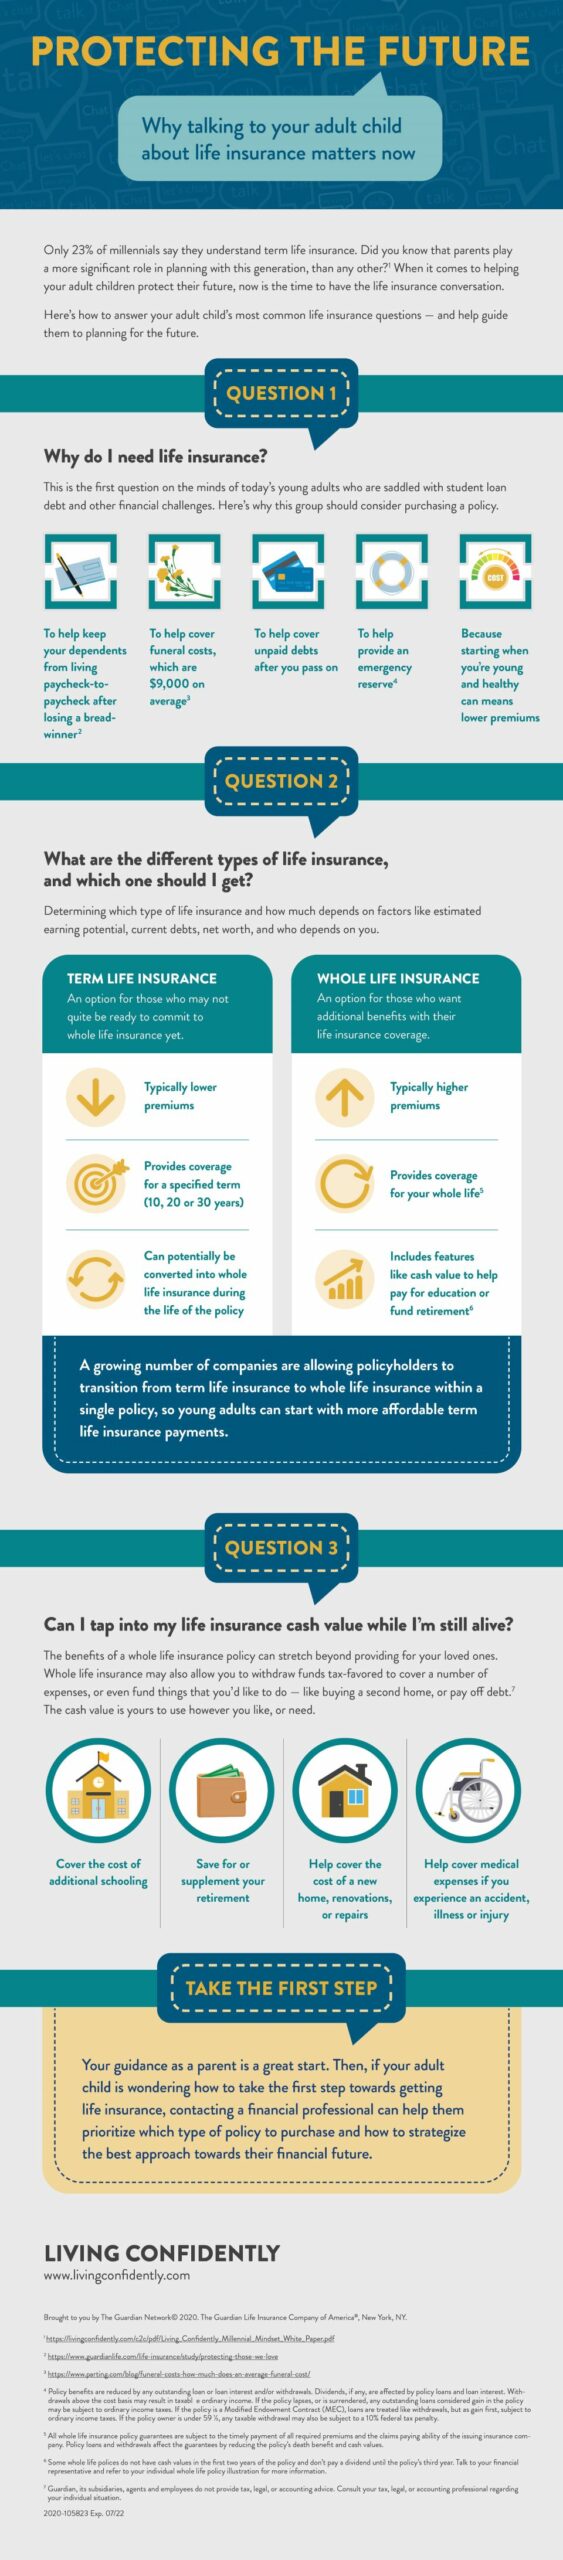 Inforgraphic on how parents can talk to millennials about life insurance